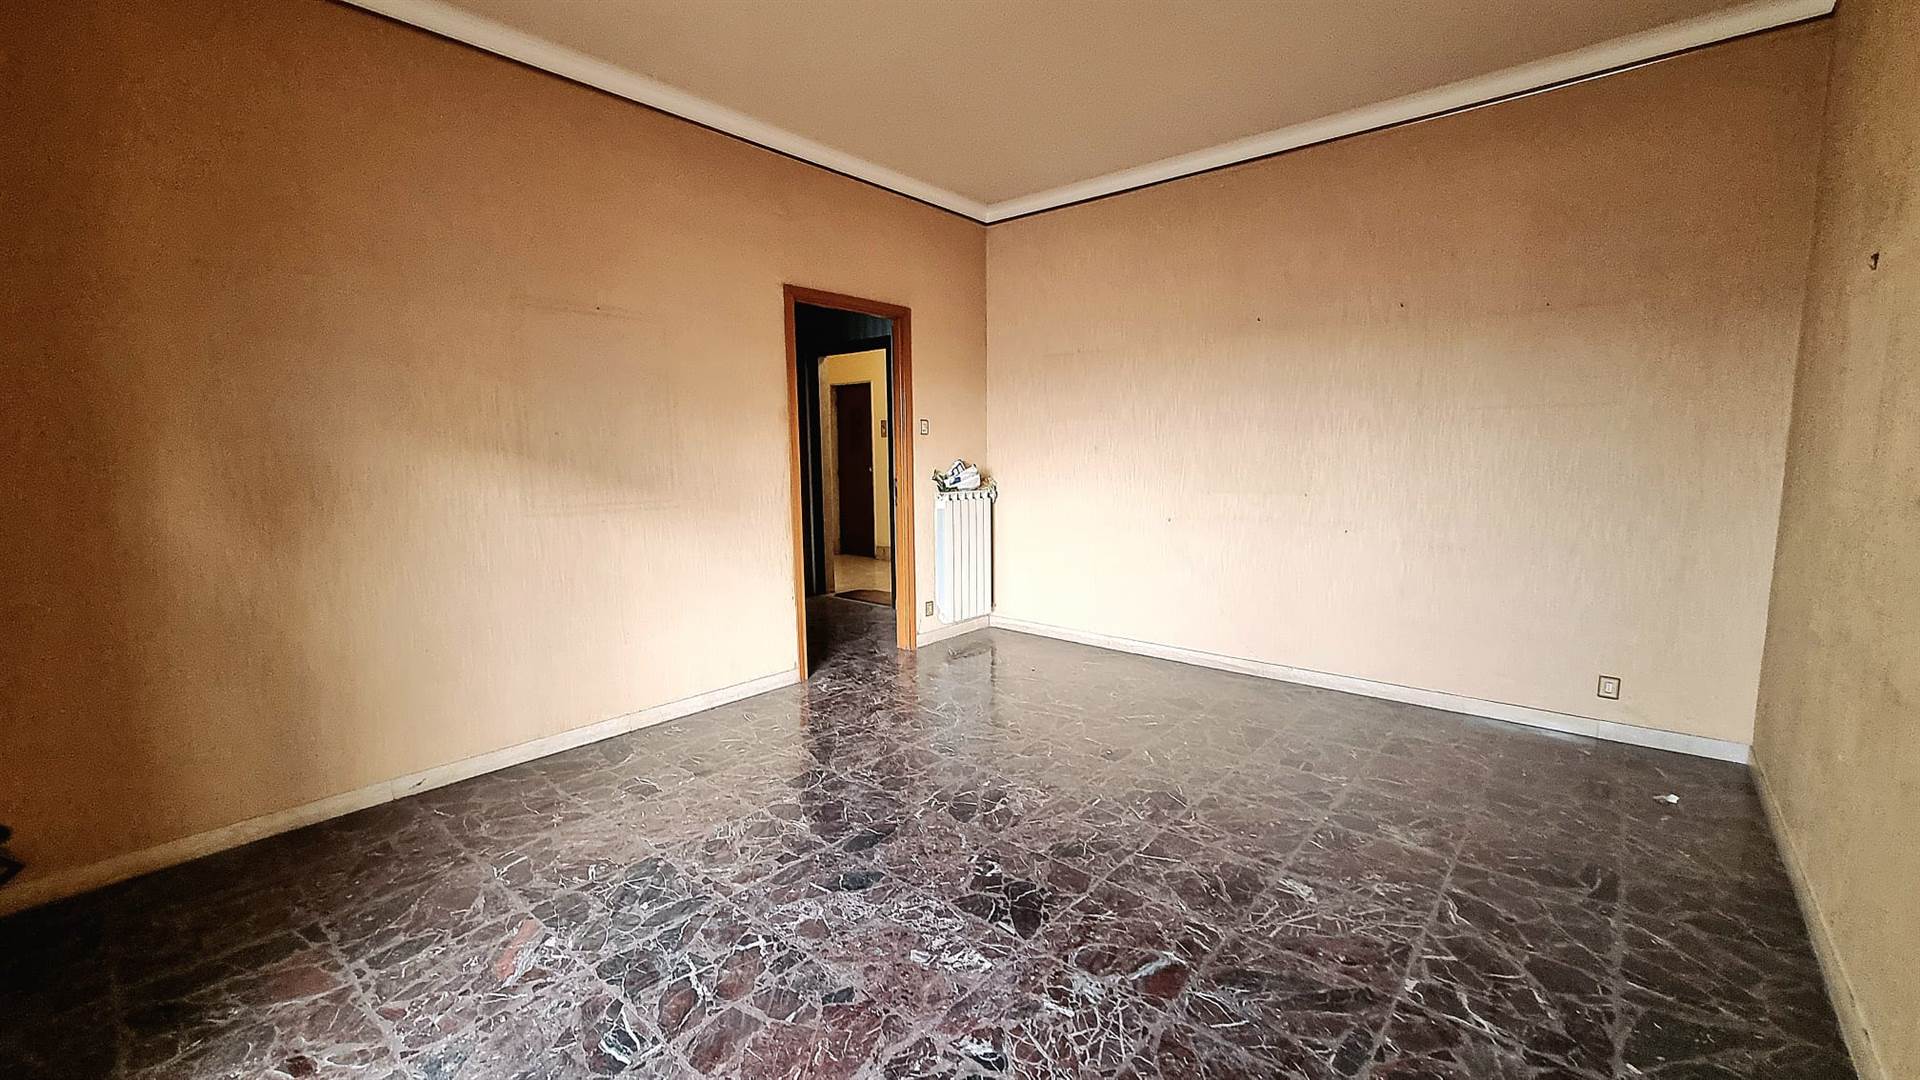 CORSO ITALIA, CATANIA, Apartment for sale of 164 Sq. mt., Be restored, Heating Individual heating system, Energetic class: D, Epi: 1 kwh/m2 year, placed at 5°, composed by: 4 Rooms, Separate kitchen, 